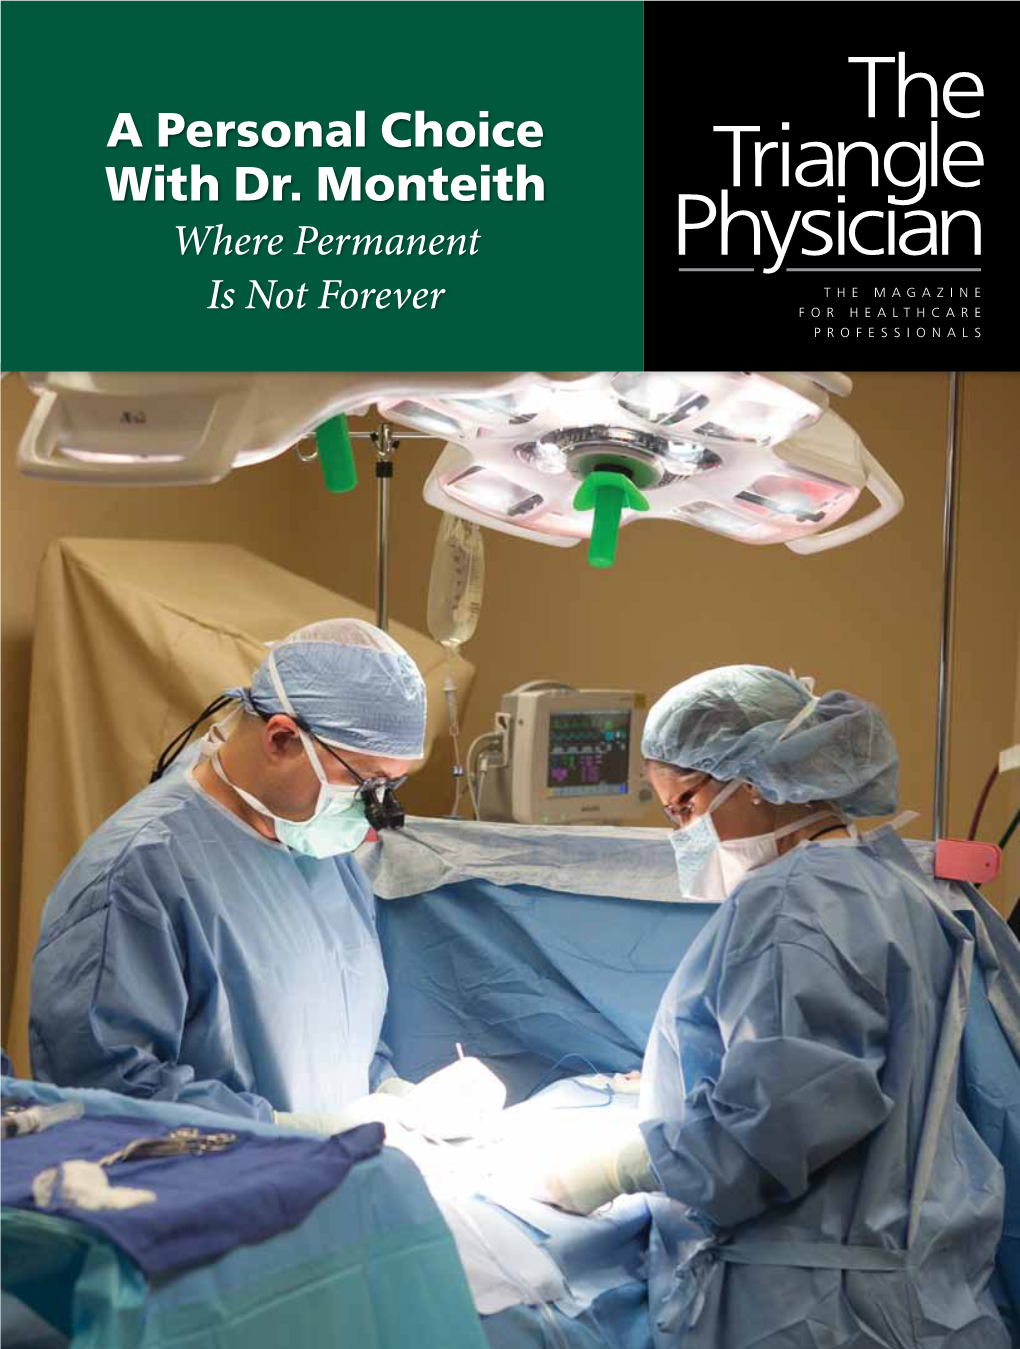 A Personal Choice with Dr. Monteith Where Permanent